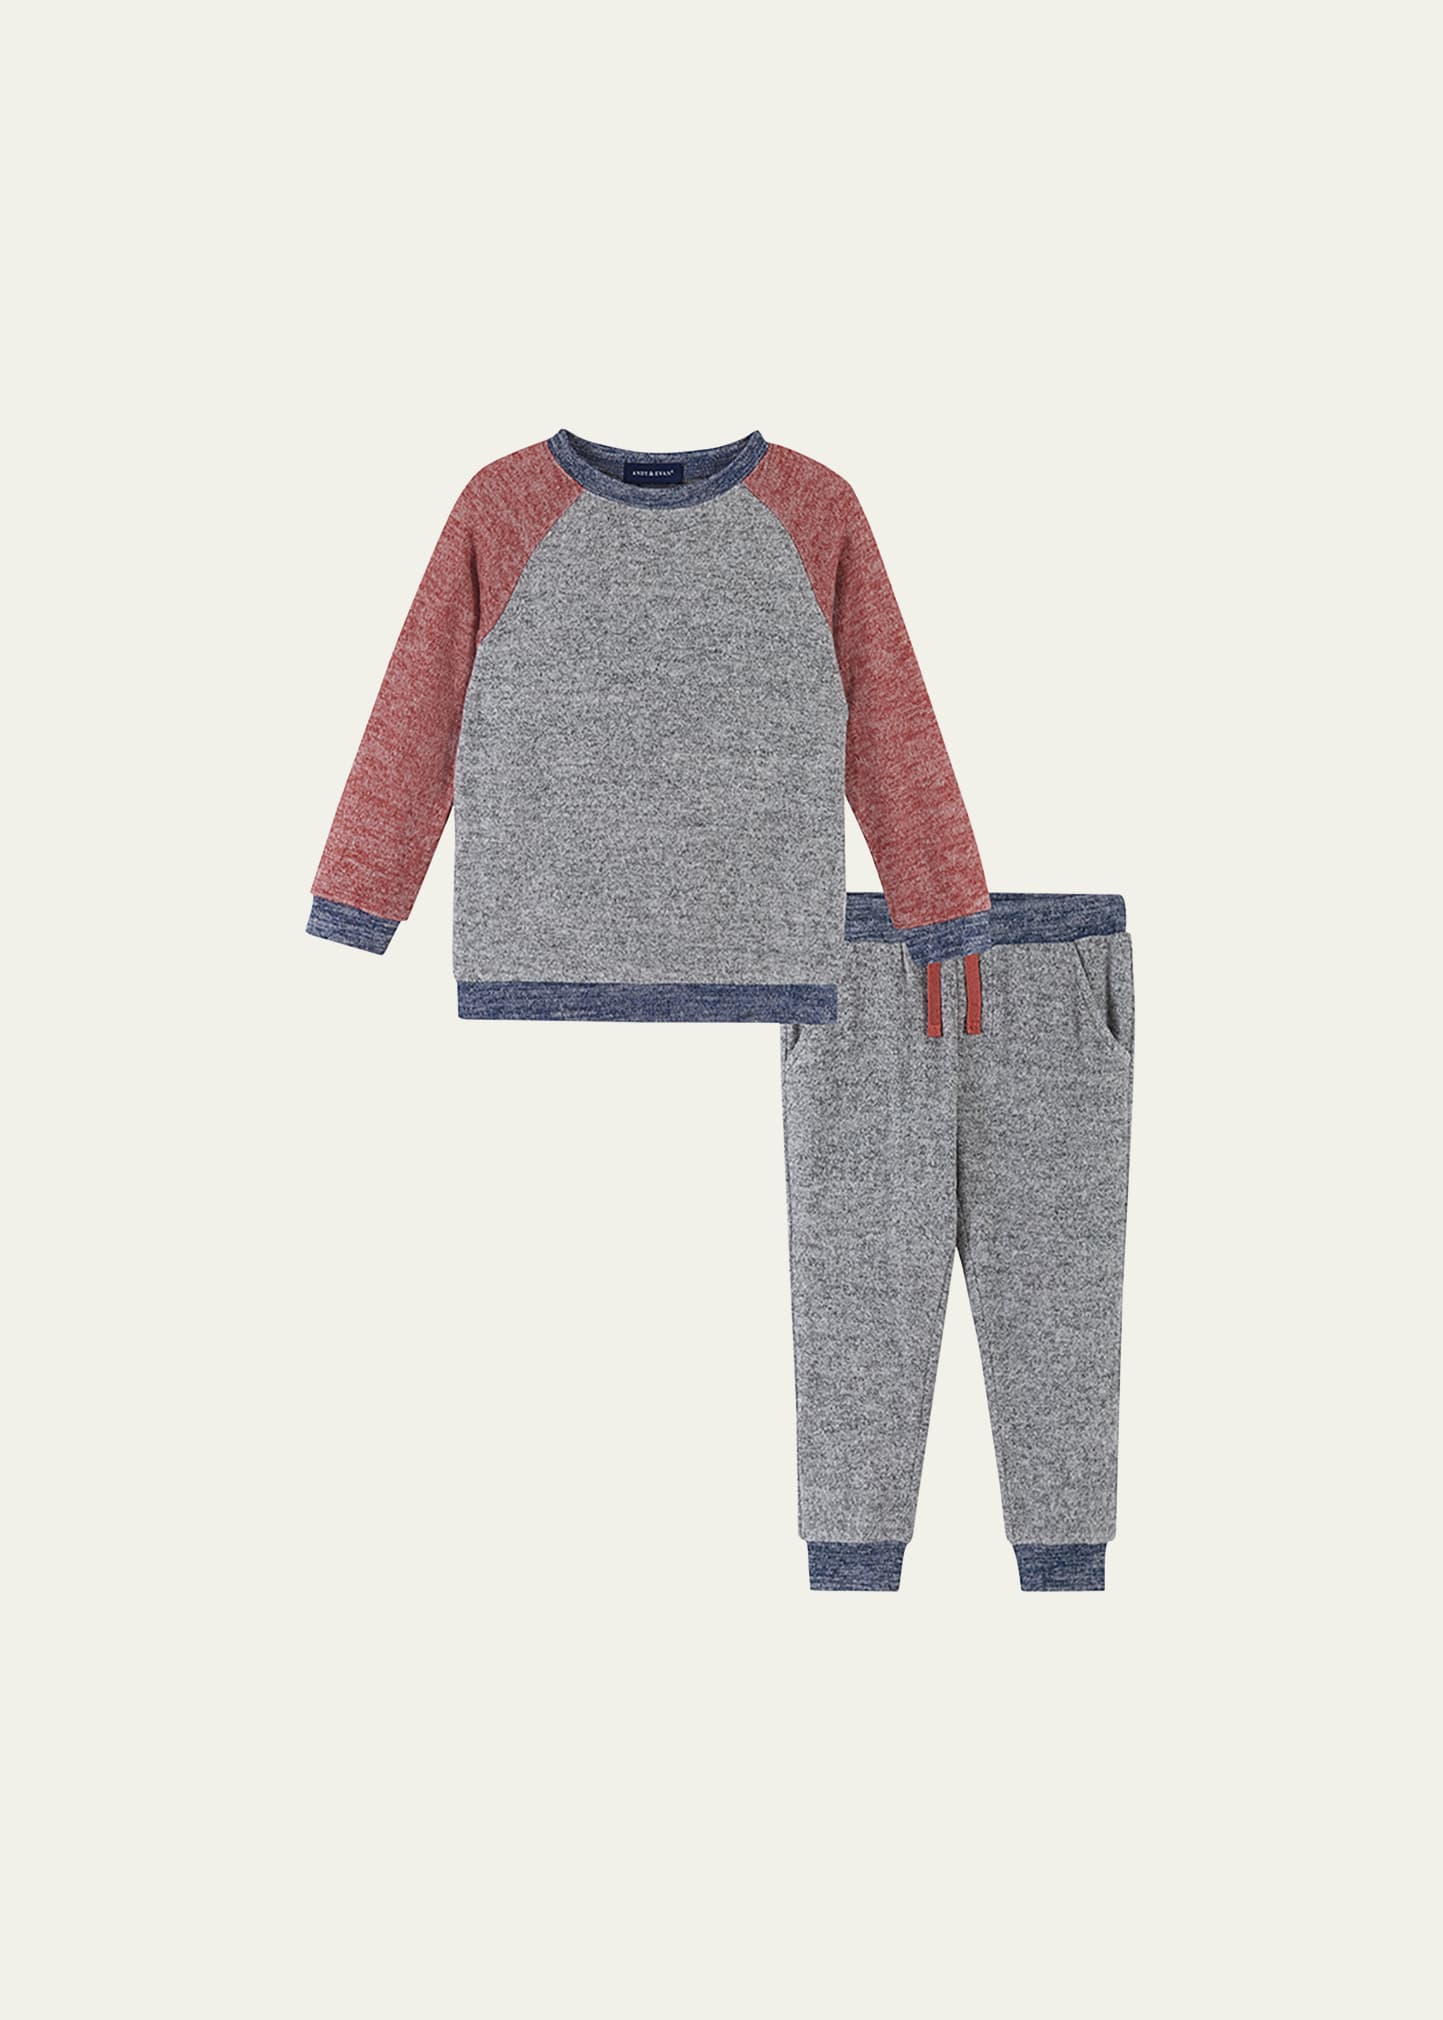 Andy & Evan Kids' Boy's Hacci Knit Two-piece Set In Grey Colorblk